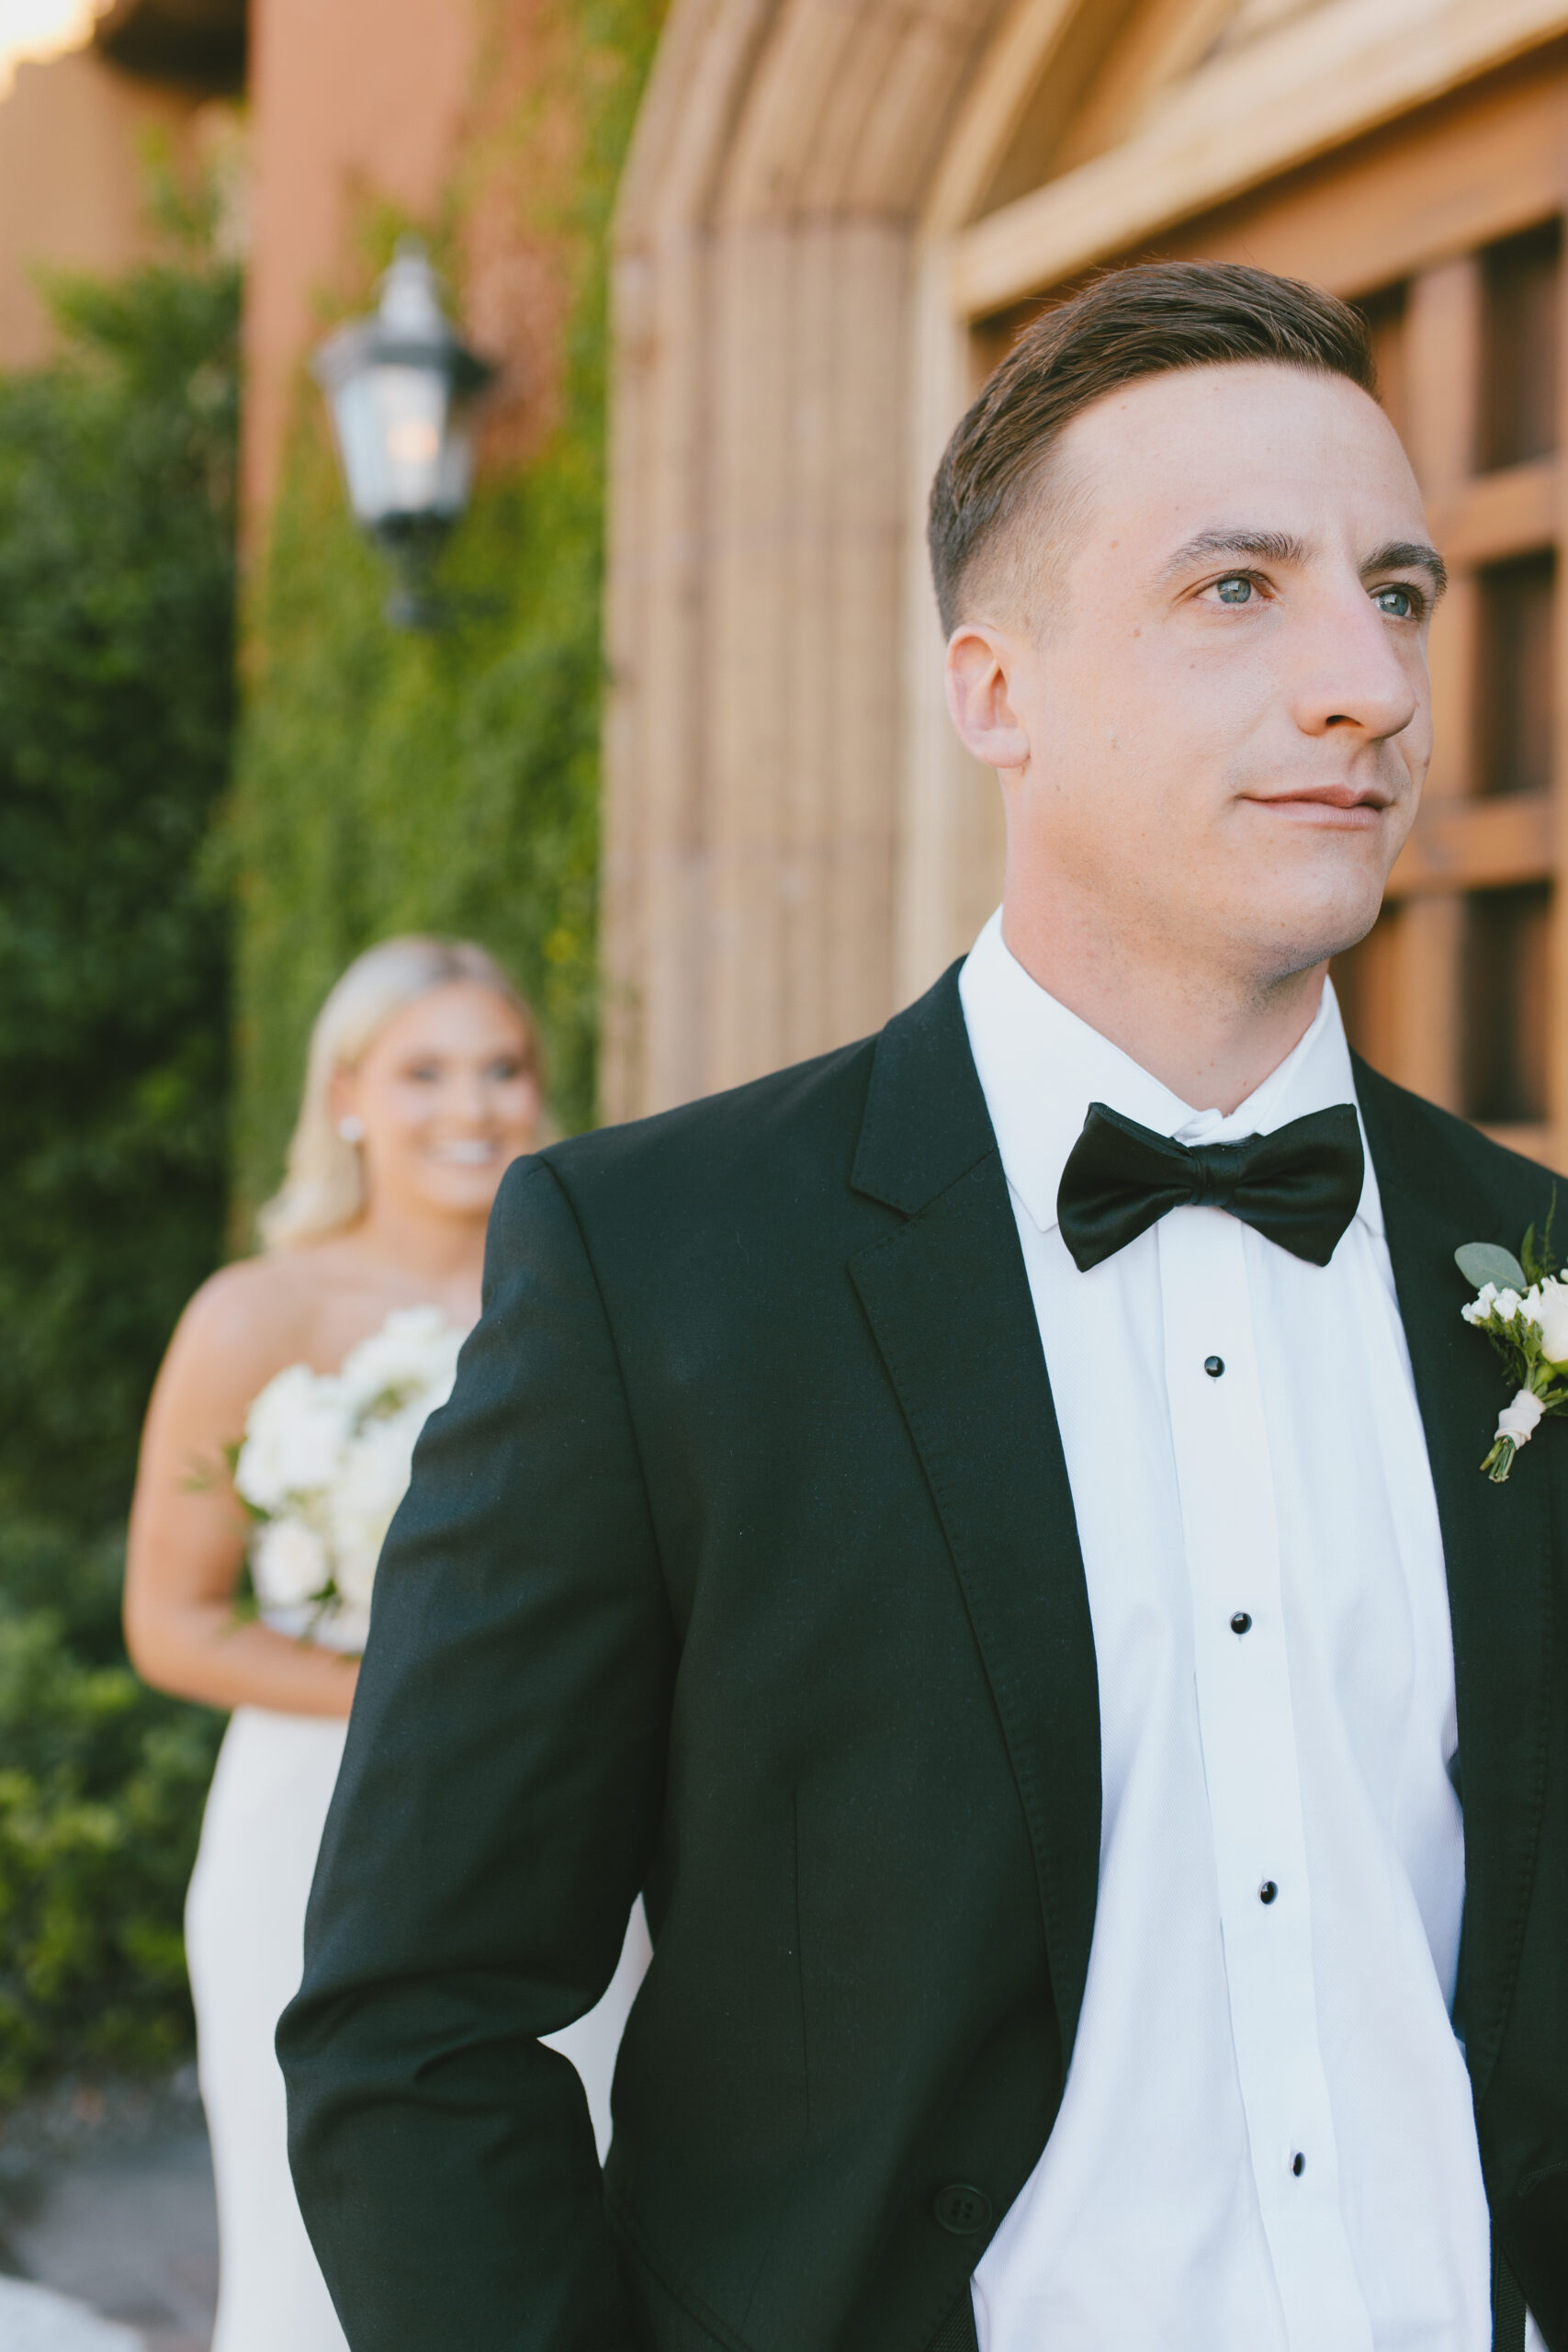 Matt and AlexaBefore the bride and groom first look focus on groom Timeless wedding photography in Phoenix